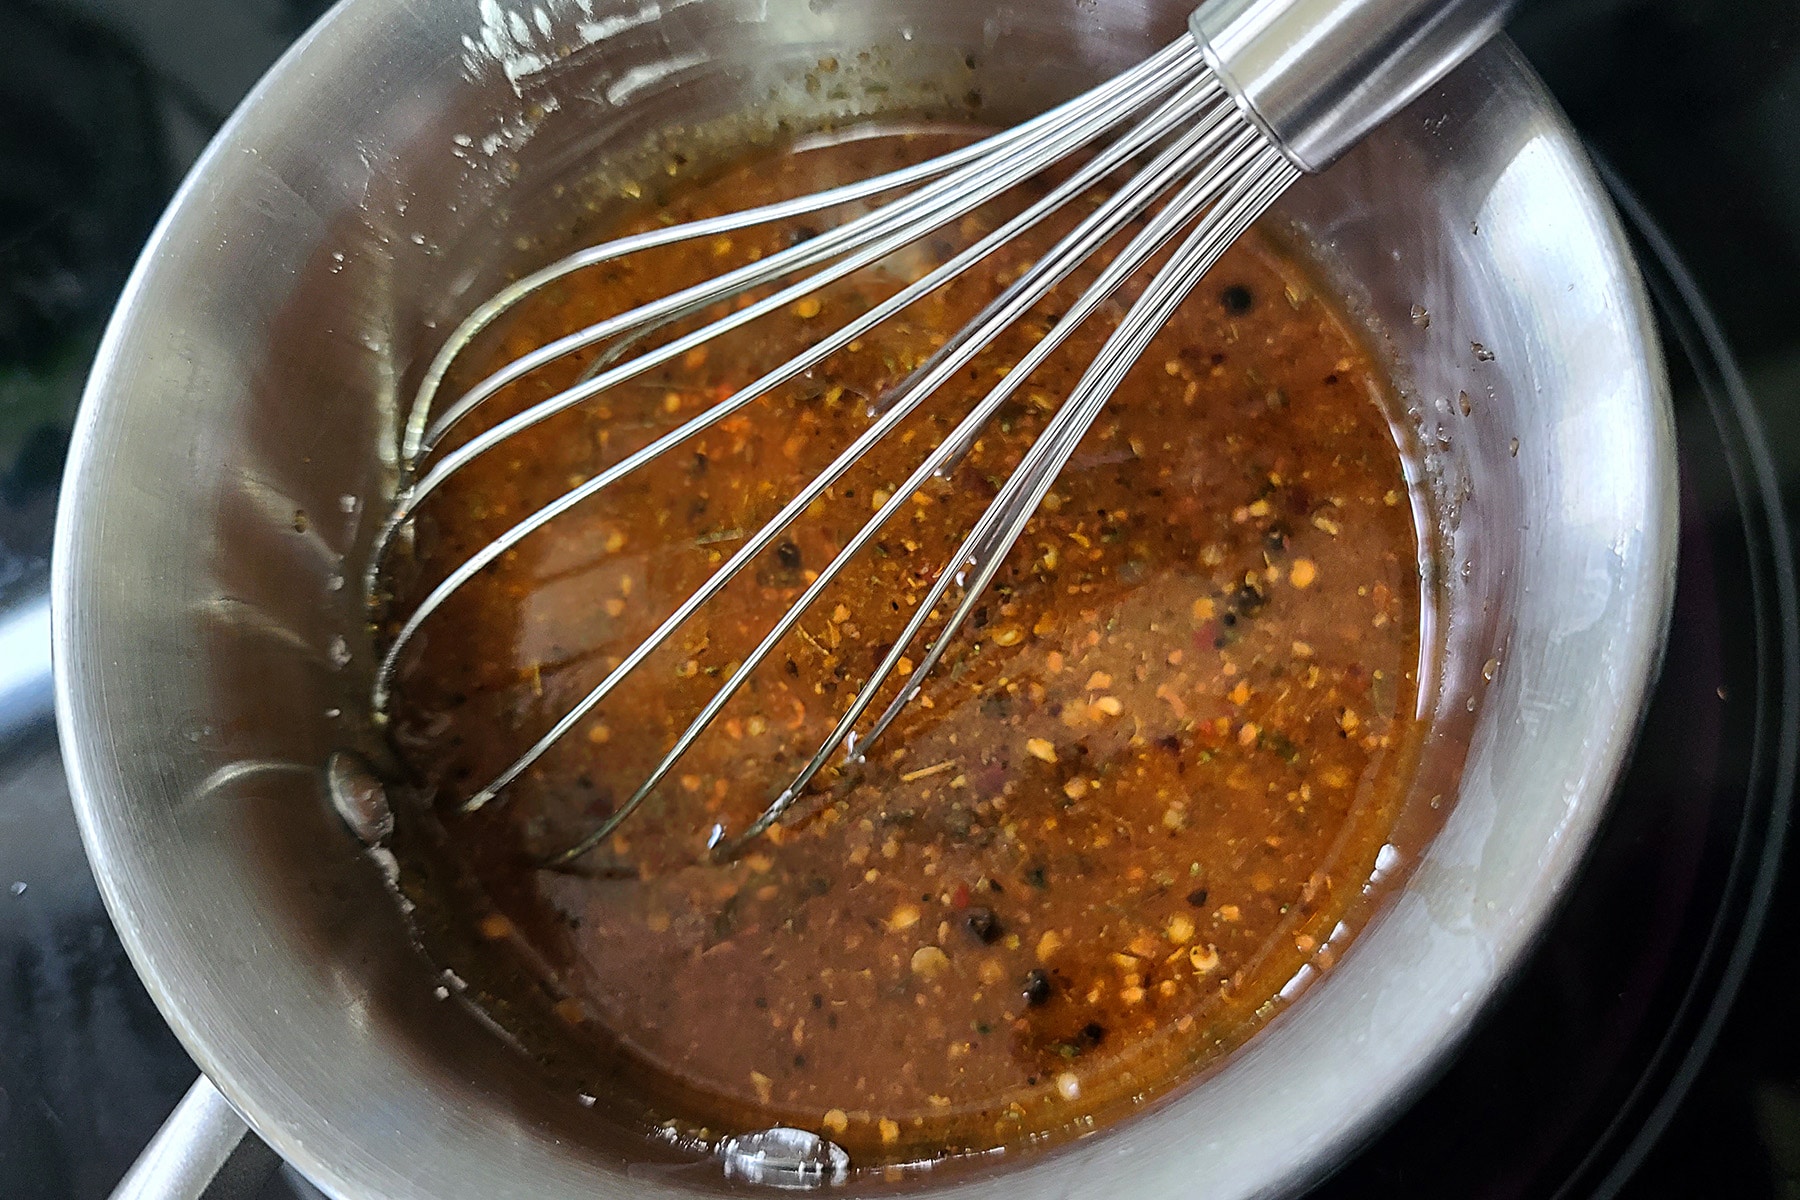 A small pot of Montreal Steak Spice Marinade.